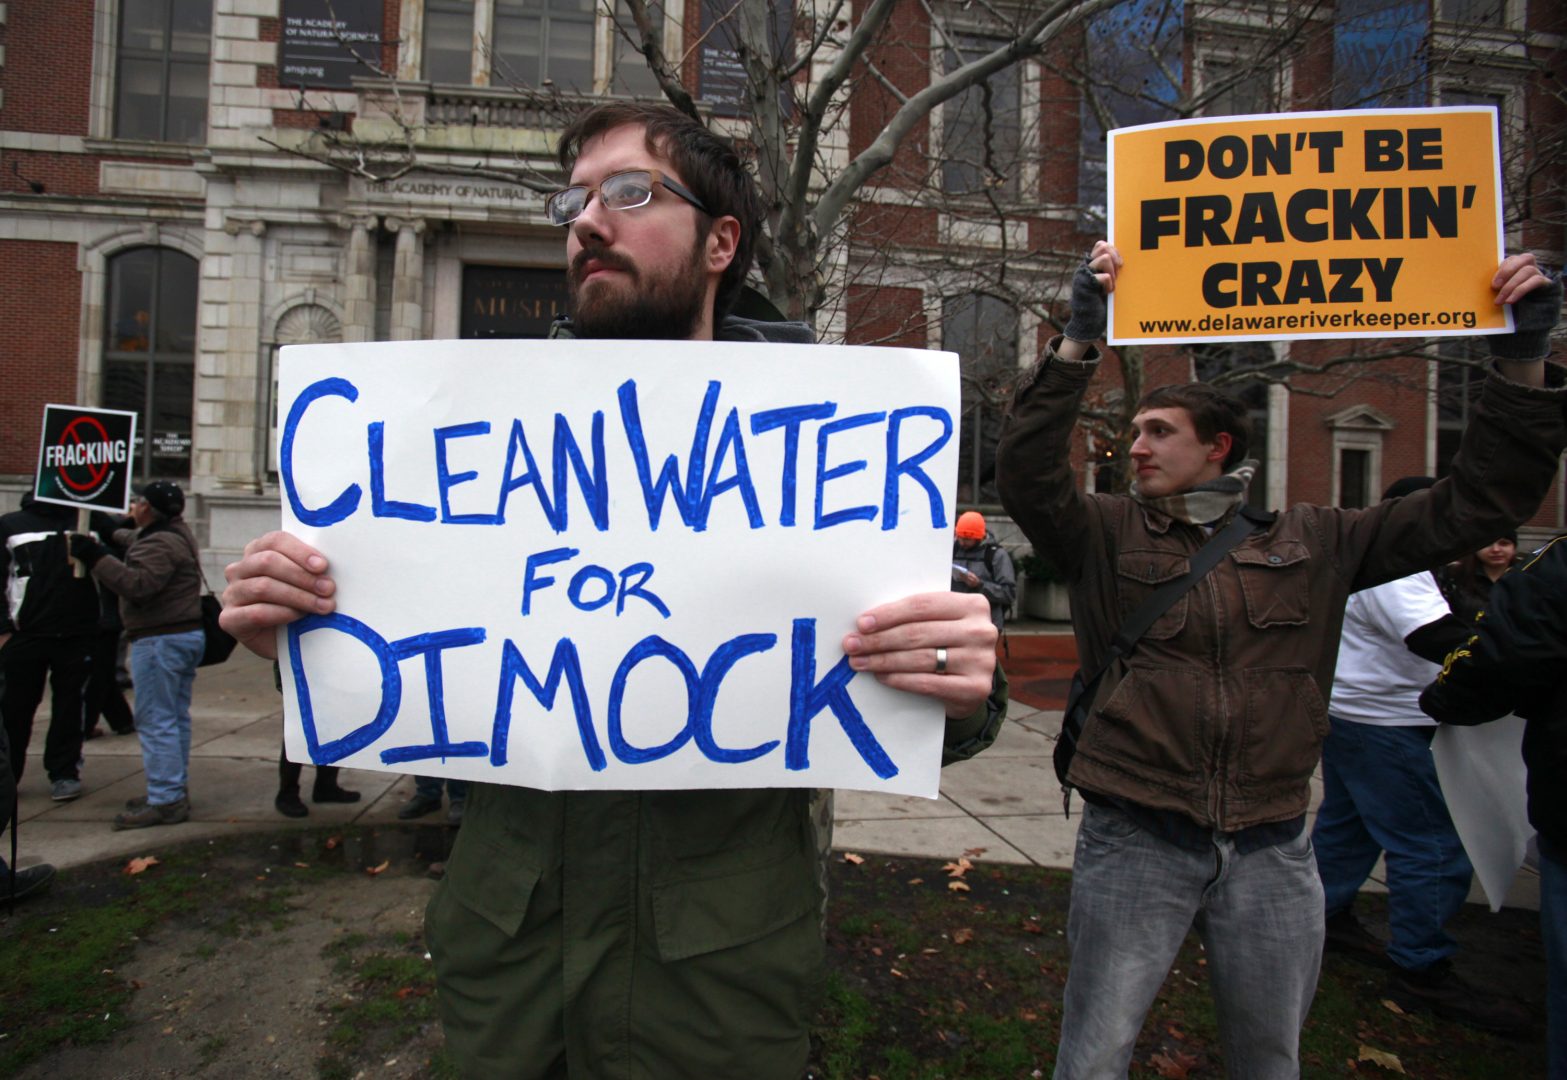 Protestors called for clean water for Dimock in a Philadelphia demonstration in 2012. Two families that sued Cabot Oil & Gas have settled.